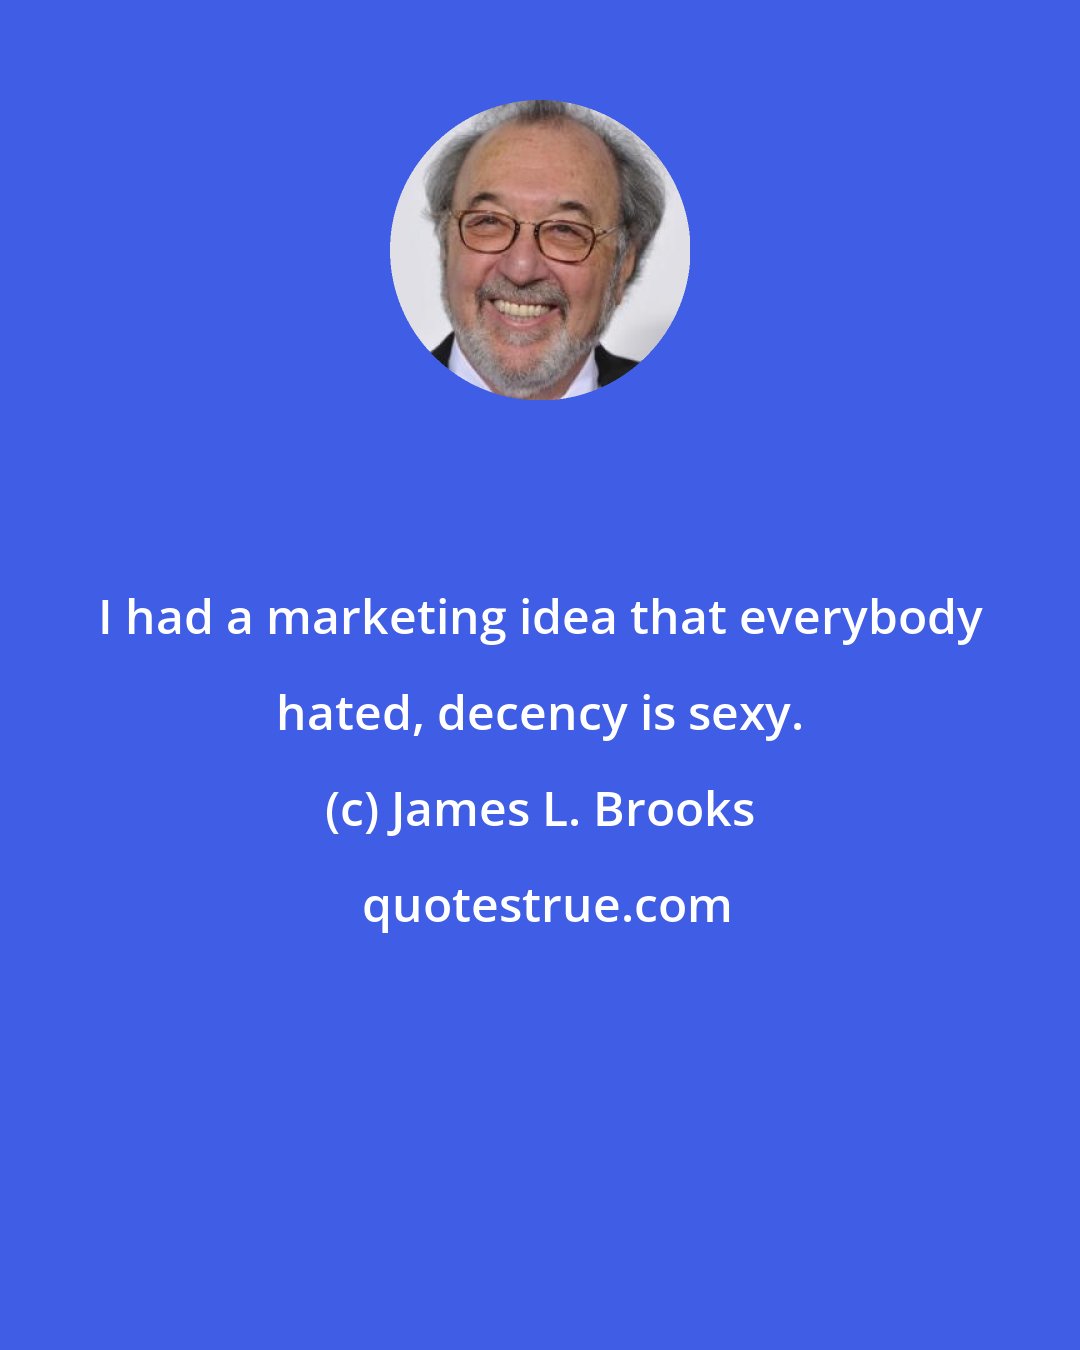 James L. Brooks: I had a marketing idea that everybody hated, decency is sexy.